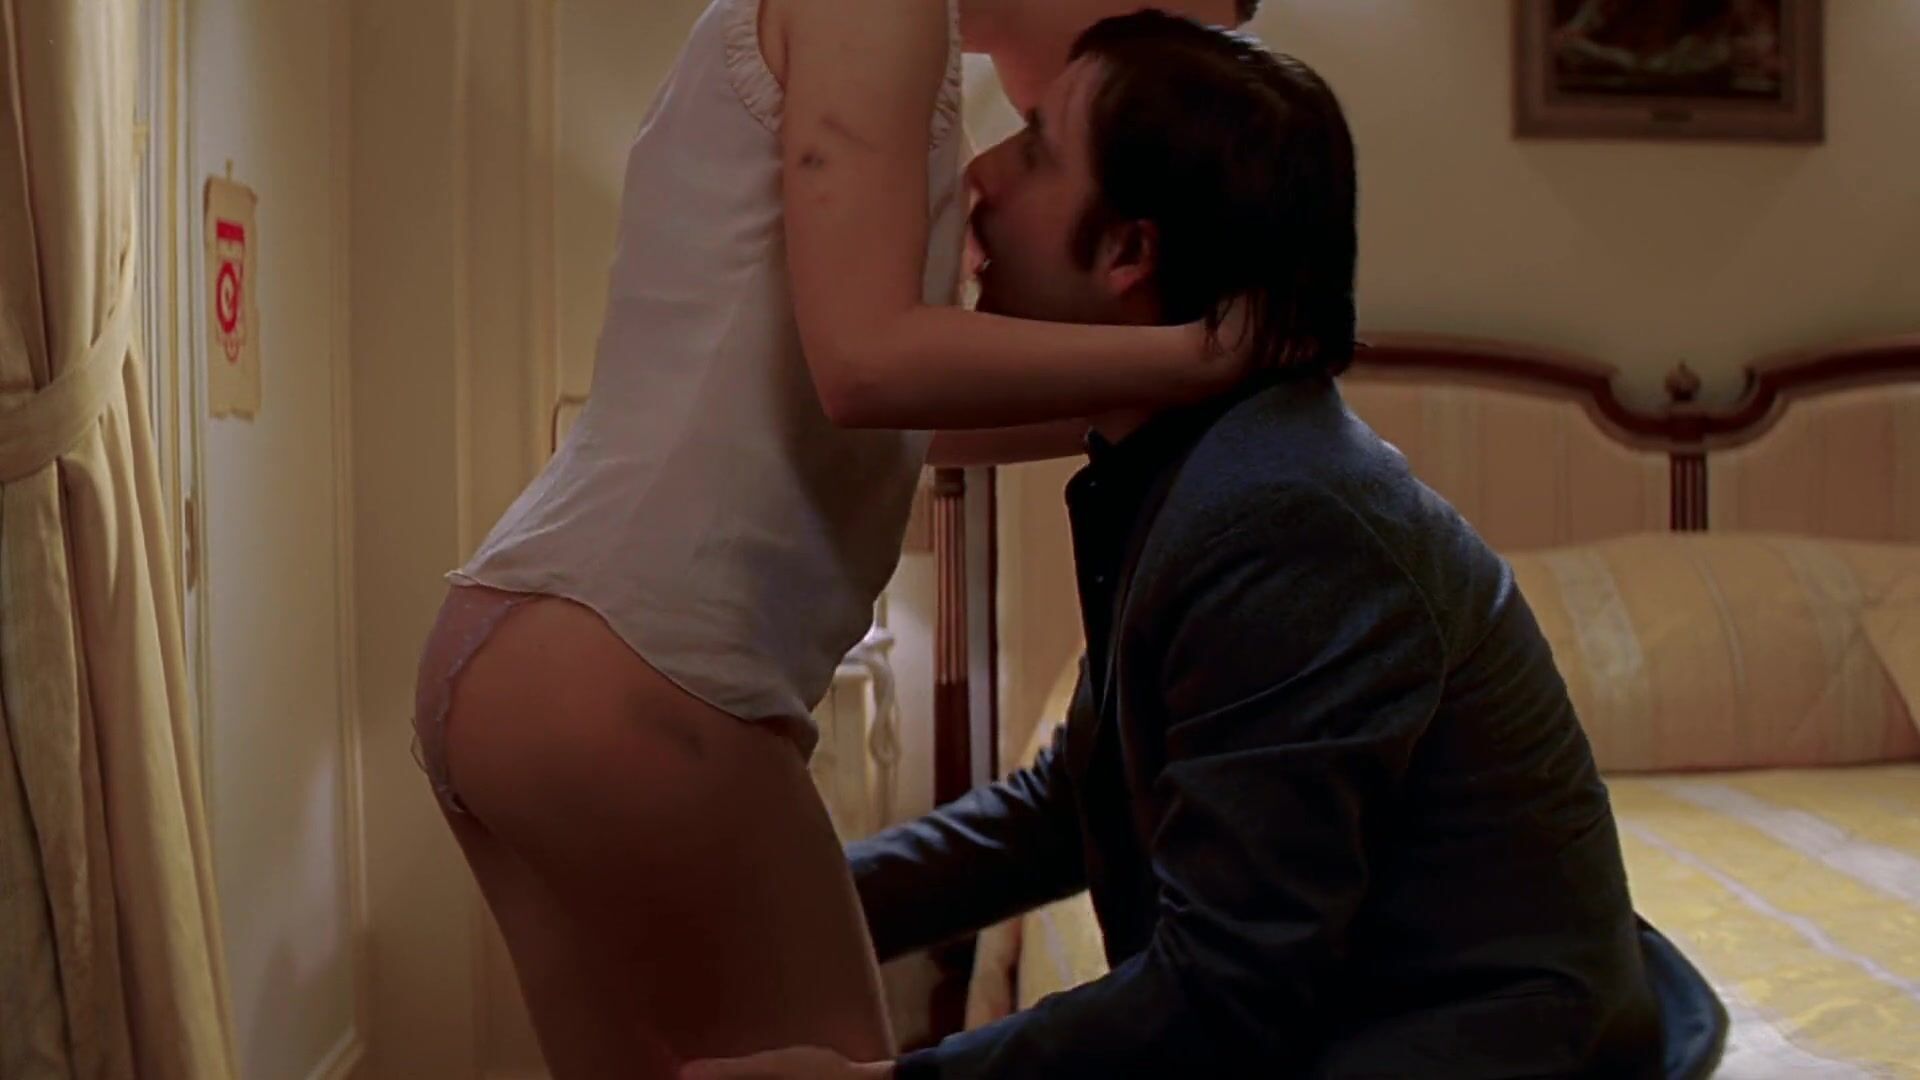 Best Blowjob Sexy actress Natalie Portman gives herself to mustachioed guy in Hotel Chevalier (2007) Best Blowjobs Ever